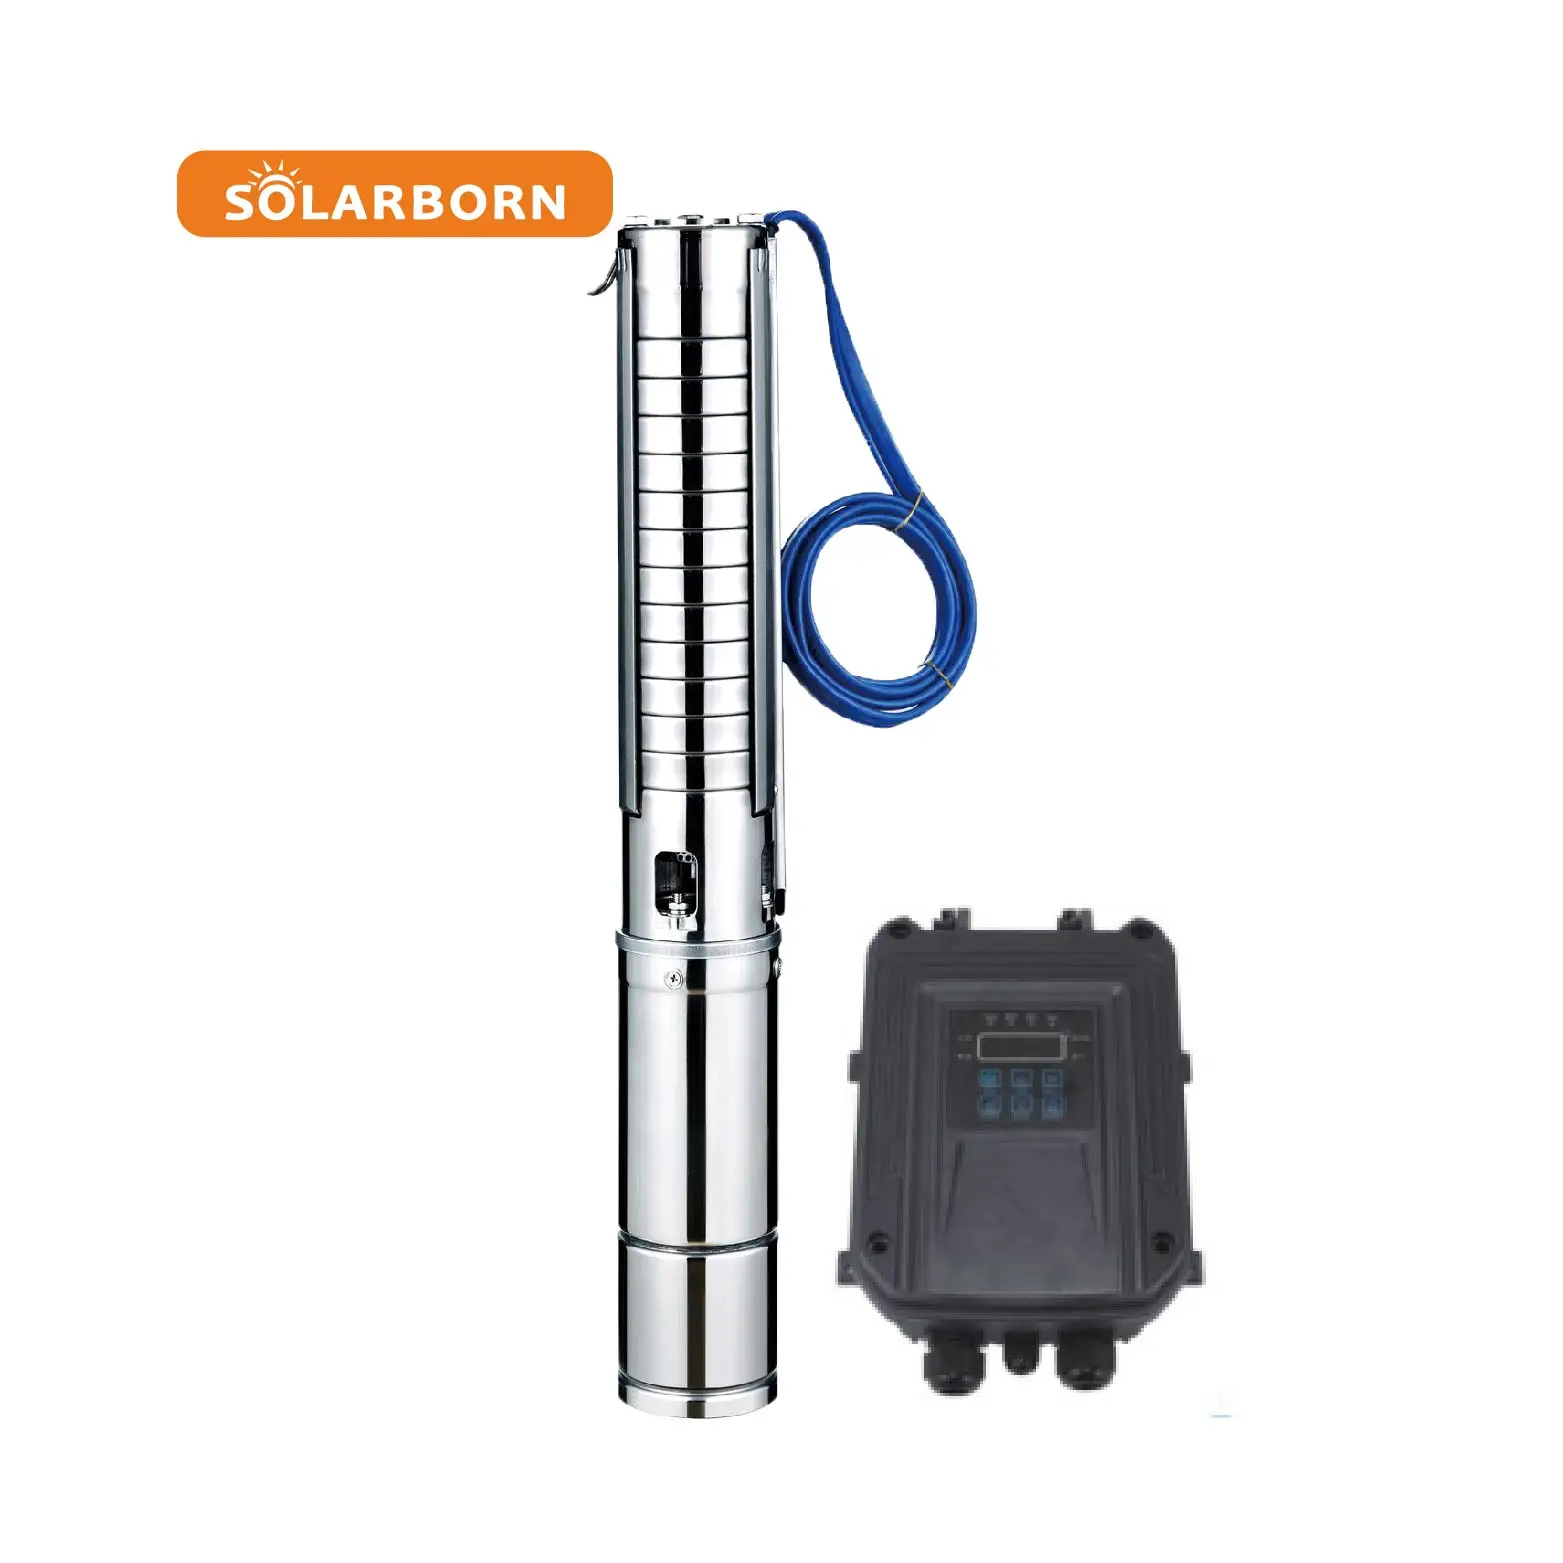 

2021 new solarborn solar pump kit pumping machine centrifugal submersible system power price solar water pump for irrigation